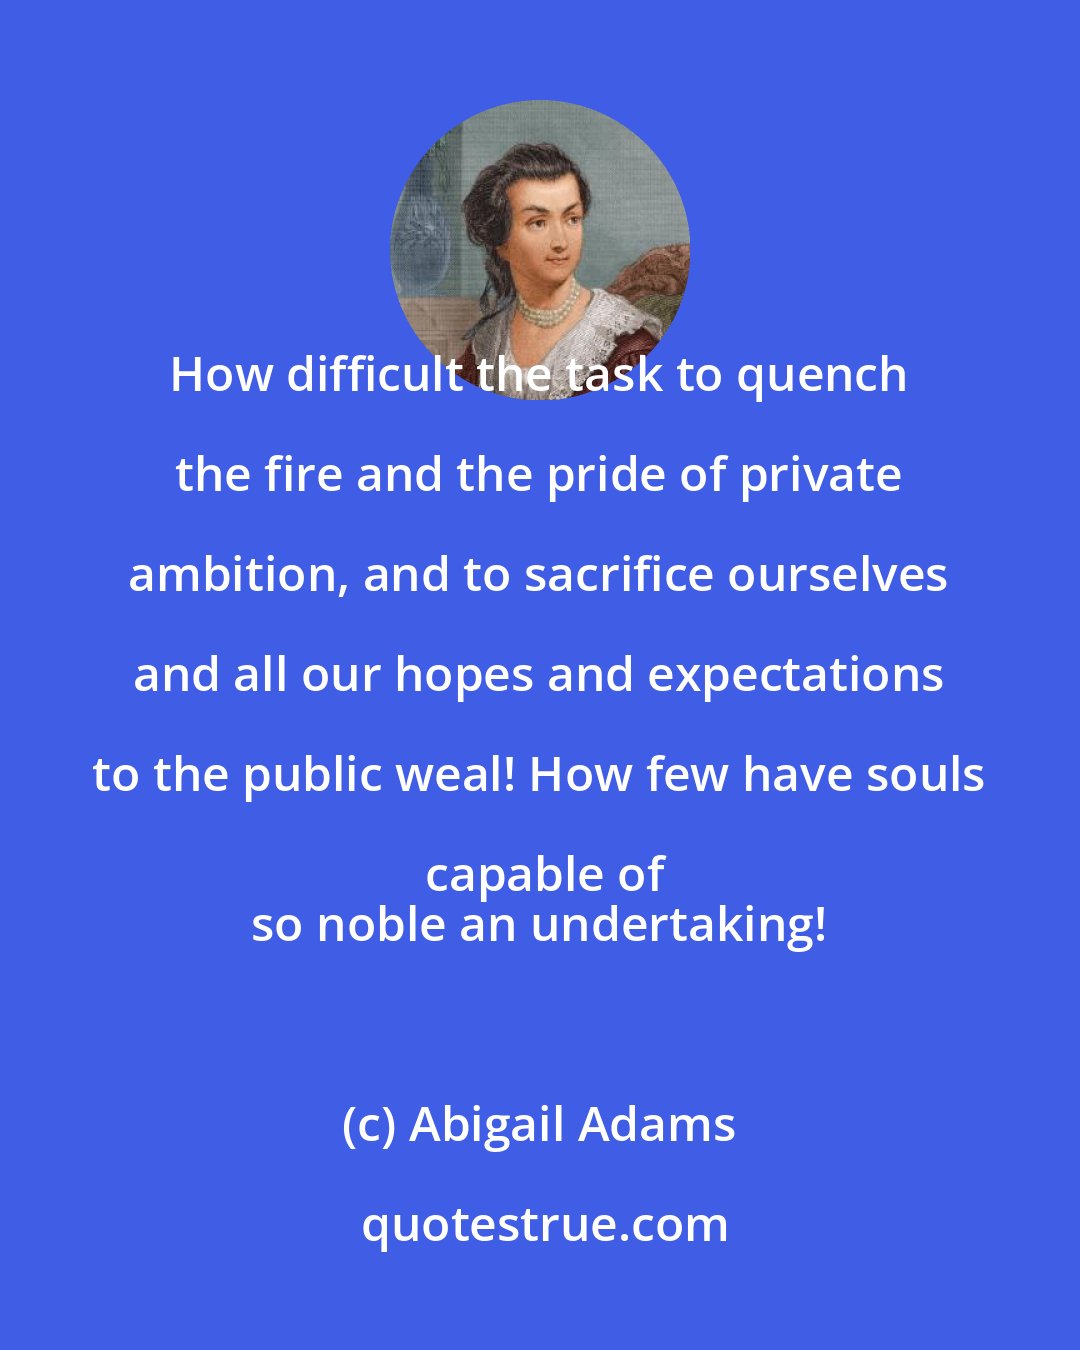 Abigail Adams: How difficult the task to quench the fire and the pride of private ambition, and to sacrifice ourselves and all our hopes and expectations to the public weal! How few have souls capable of
 so noble an undertaking!